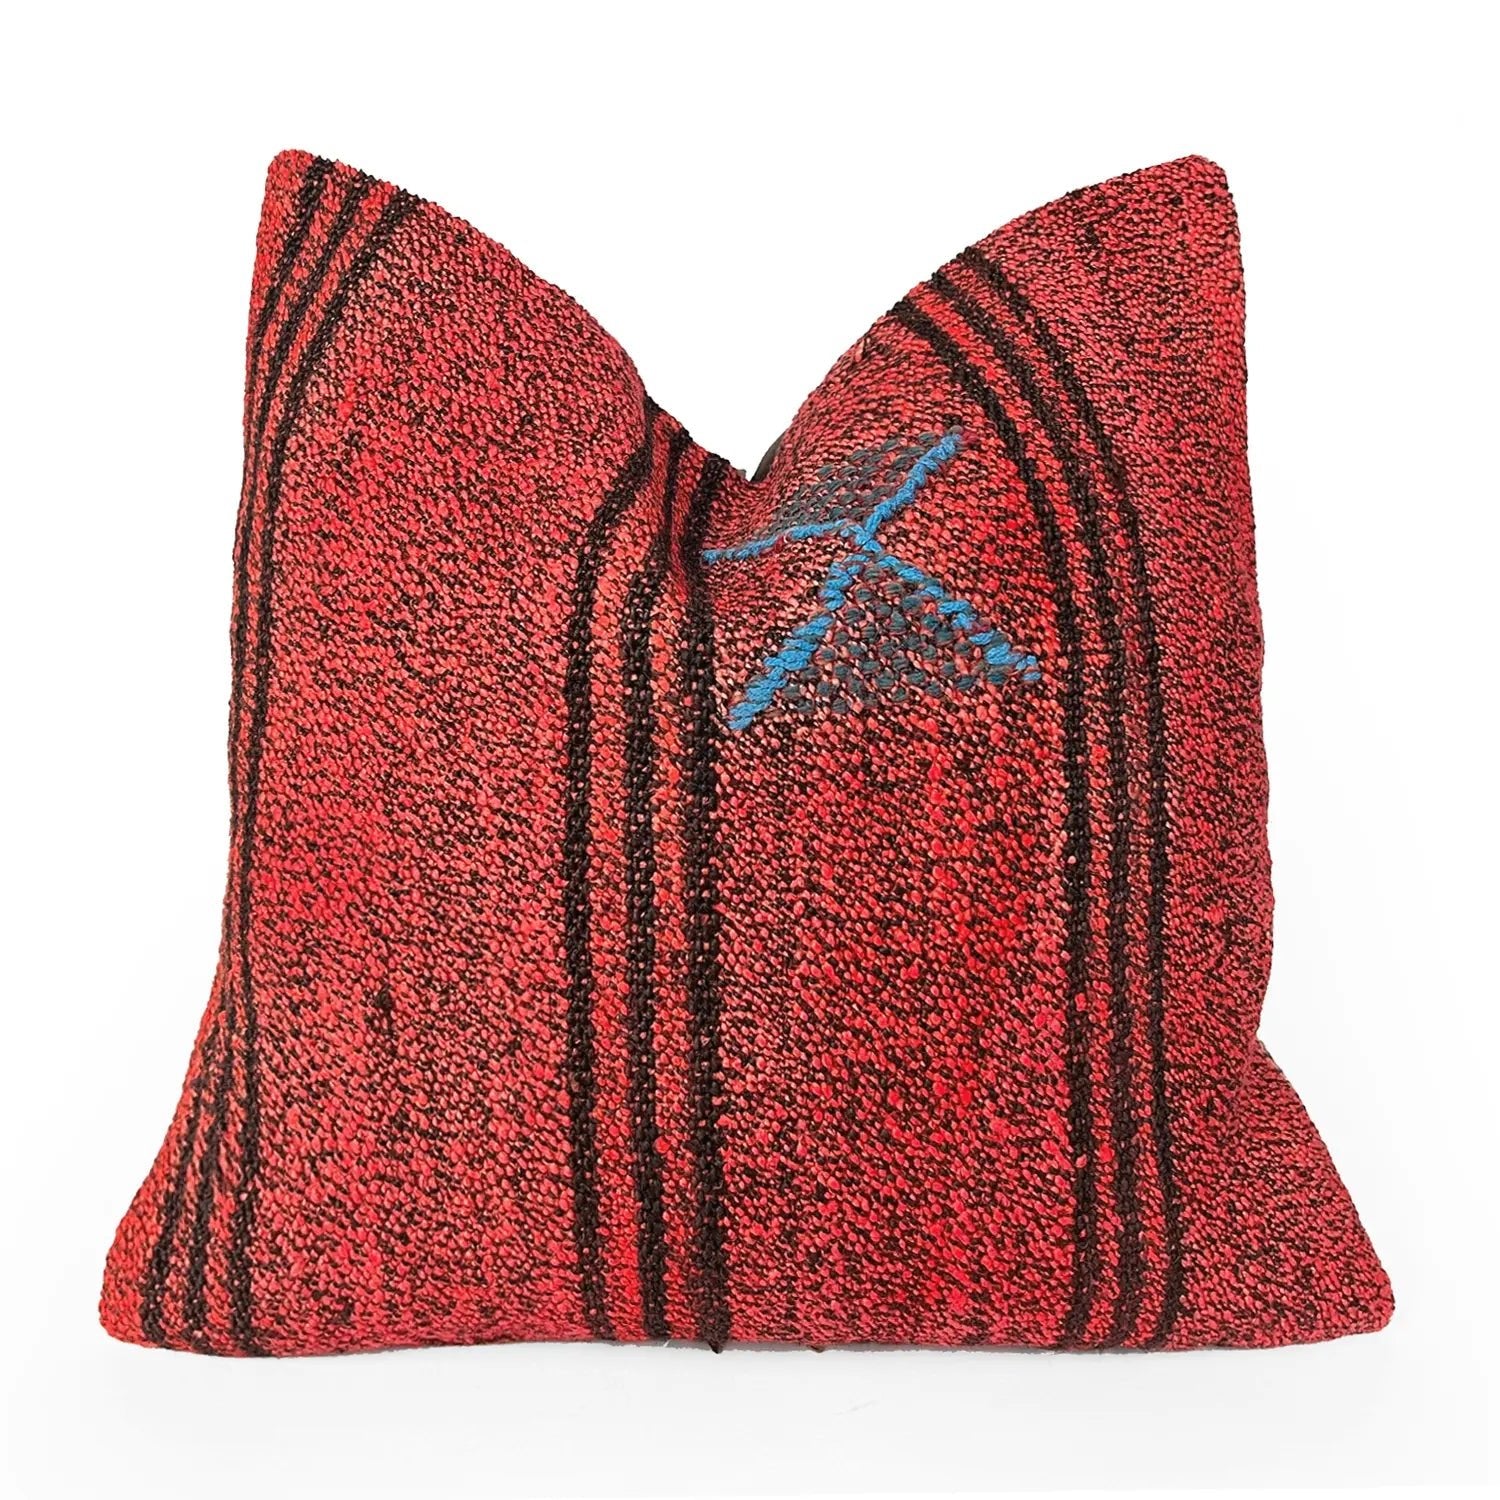 Red Vintage Accent Pillow H U N T E D F O X